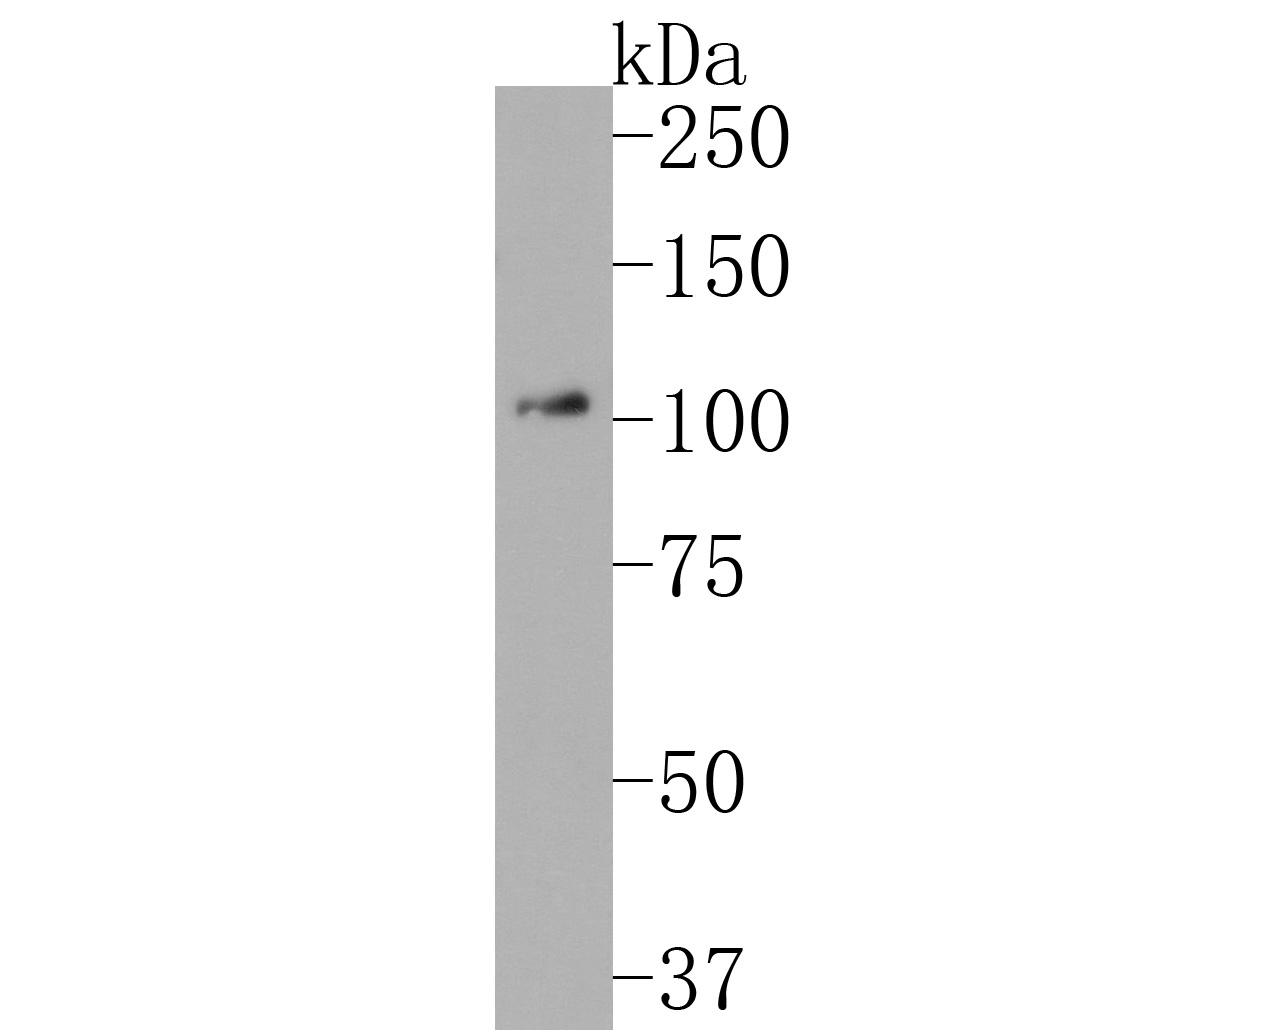 Western blot analysis of DDX58 on HUVEC cell lysates. Proteins were transferred to a PVDF membrane and blocked with 5% NFDM/TBST for 1 hour at room temperature. The primary antibody (HA720090, 1/500) was used in 5% NFDM/TBST at room temperature for 2 hours. Goat Anti-Rabbit IgG - HRP Secondary Antibody (HA1001) at 1:200,000 dilution was used for 1 hour at room temperature.